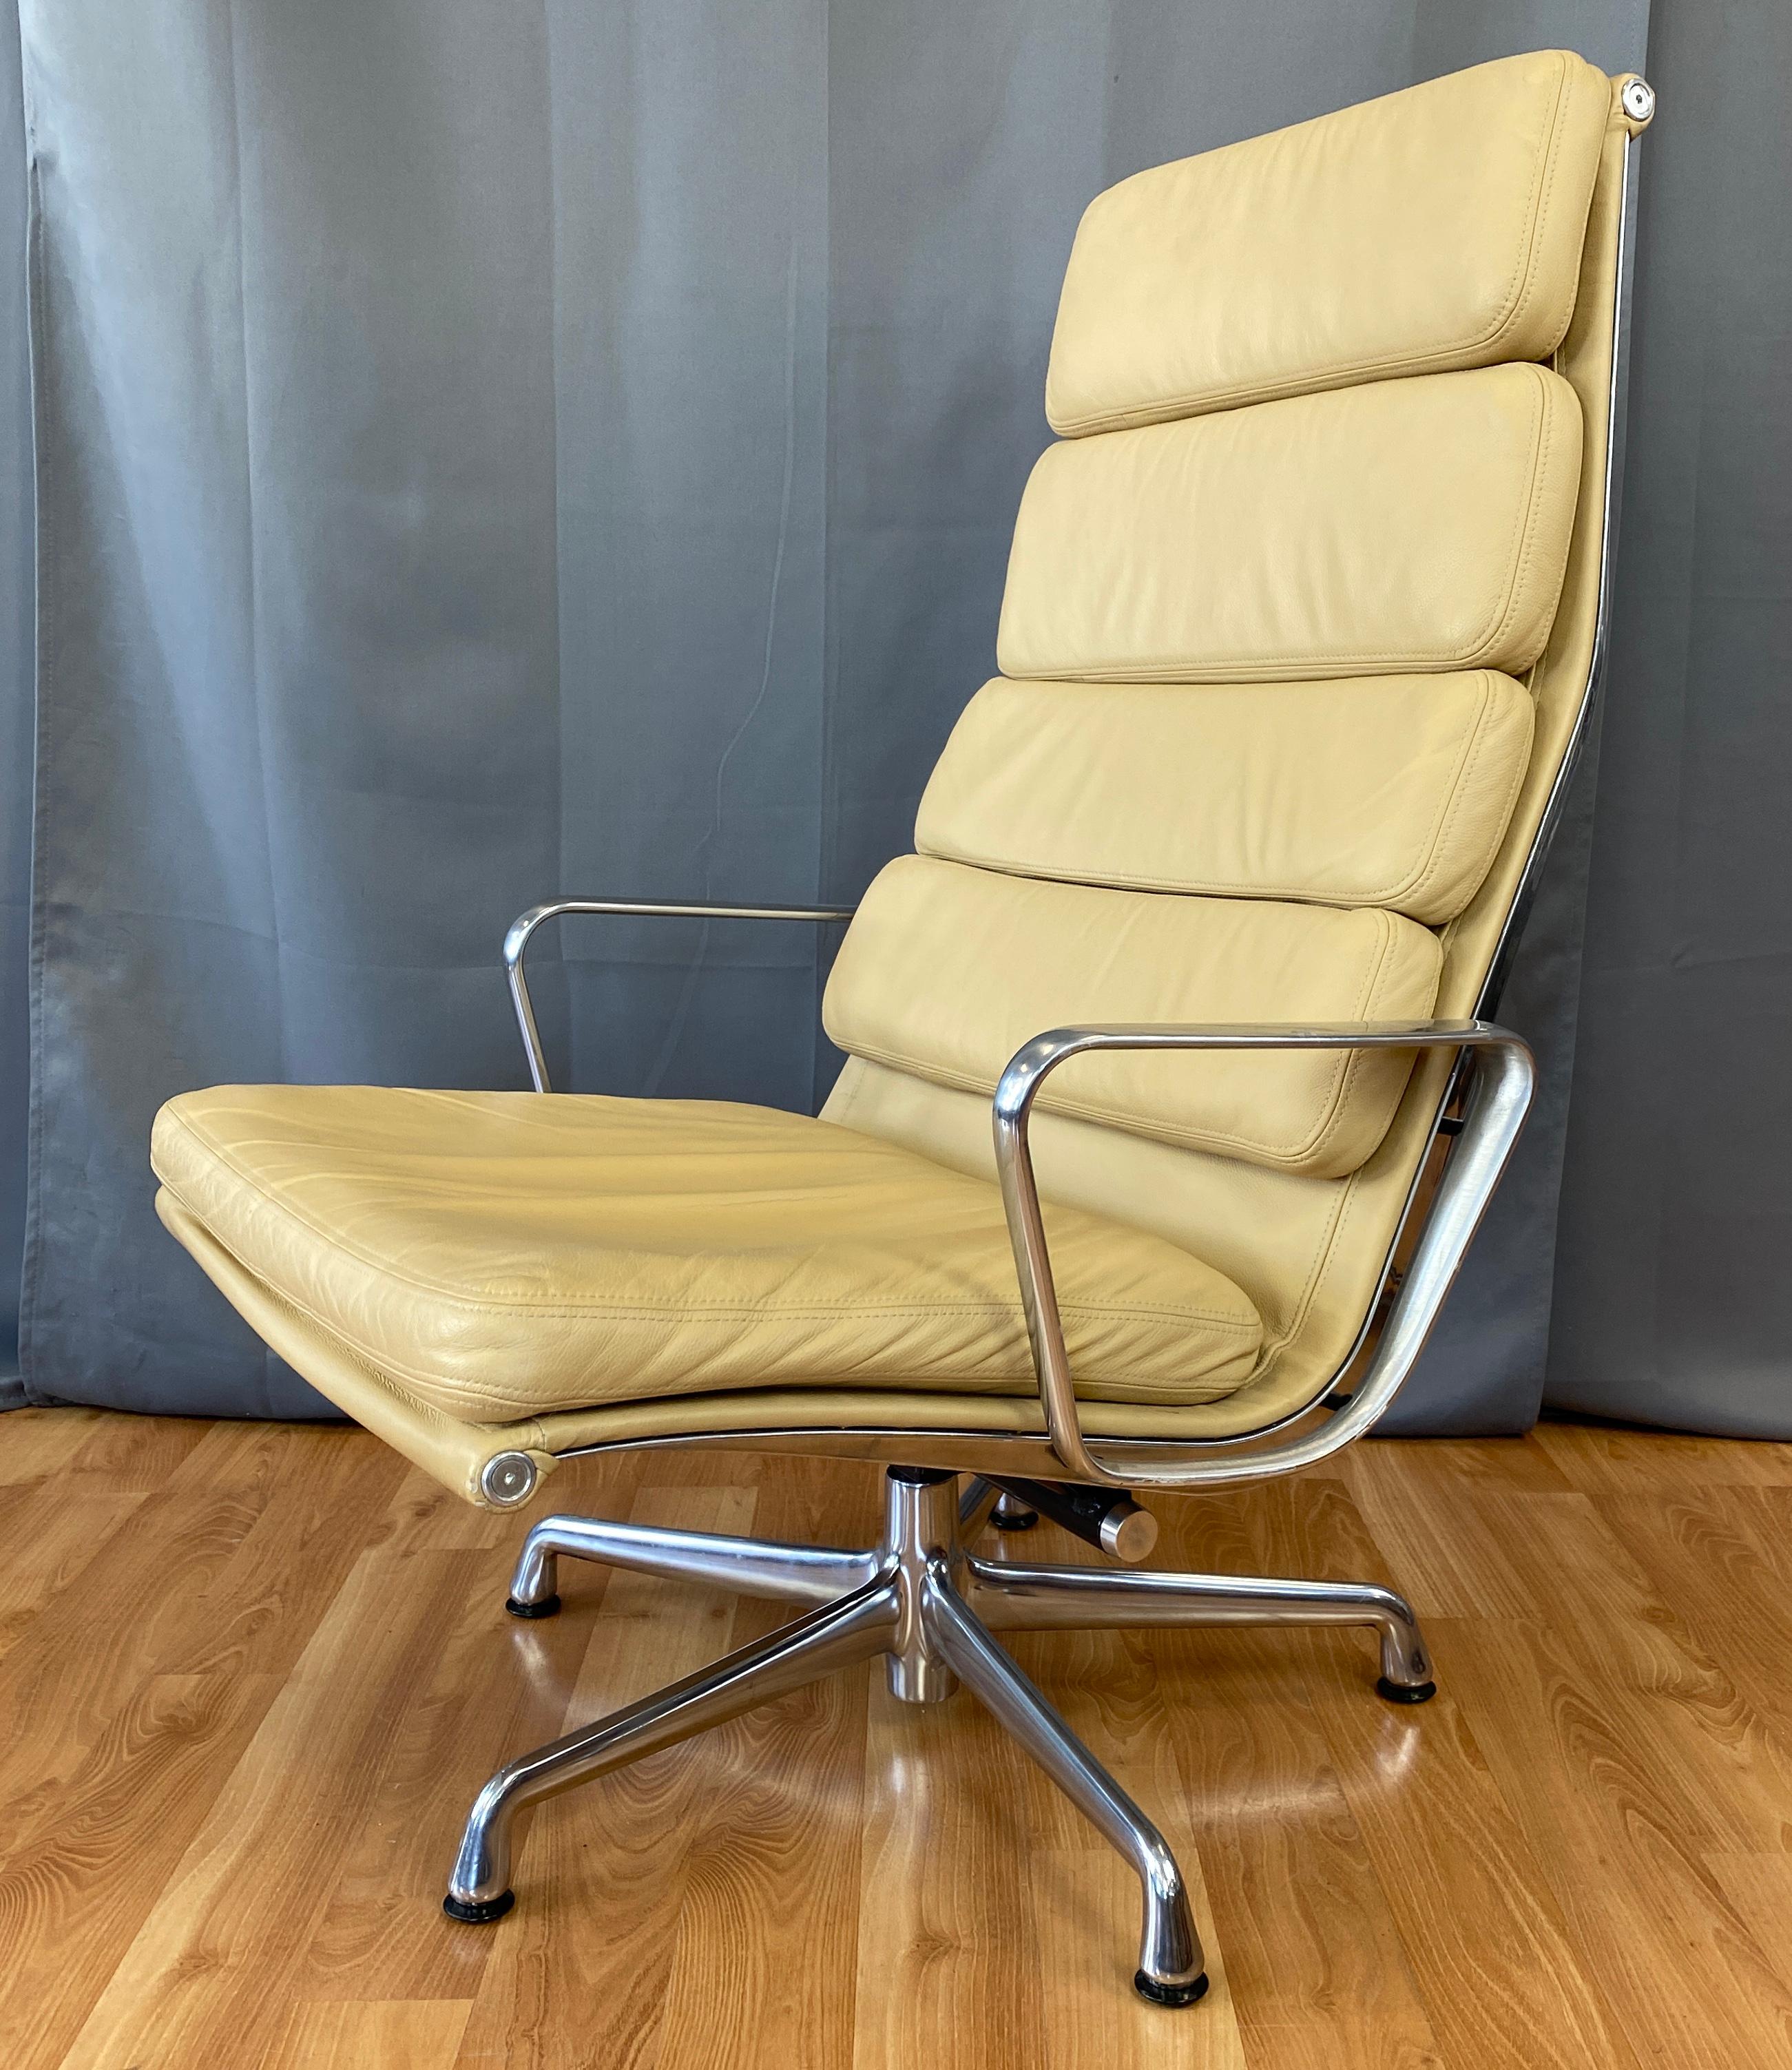 Part of the Eames Aluminum Group, for Herman Miller.
It's the 4 back cushion model in leather, with the color like desert sand.